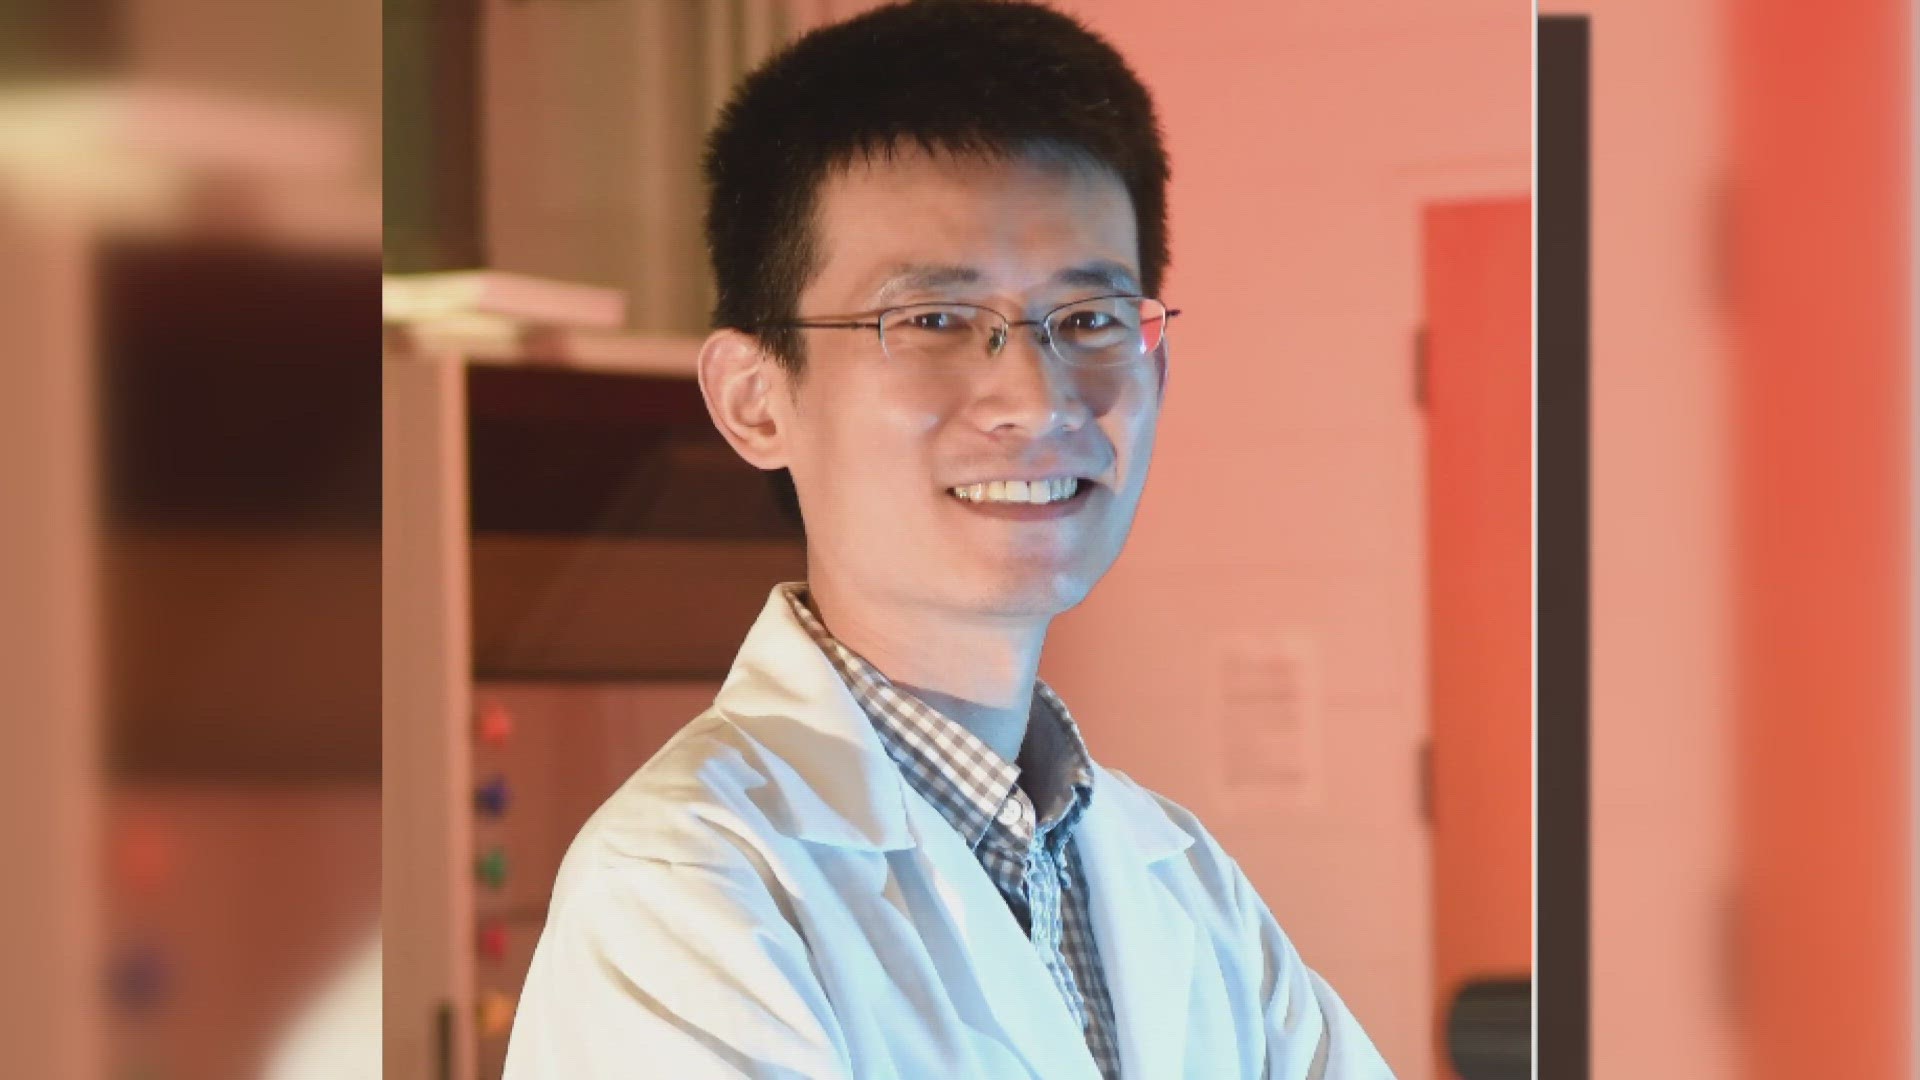 Dr. Zijie Yan moved to UNC in 2019, but he stayed in contact with his colleague from the University of Chicago.